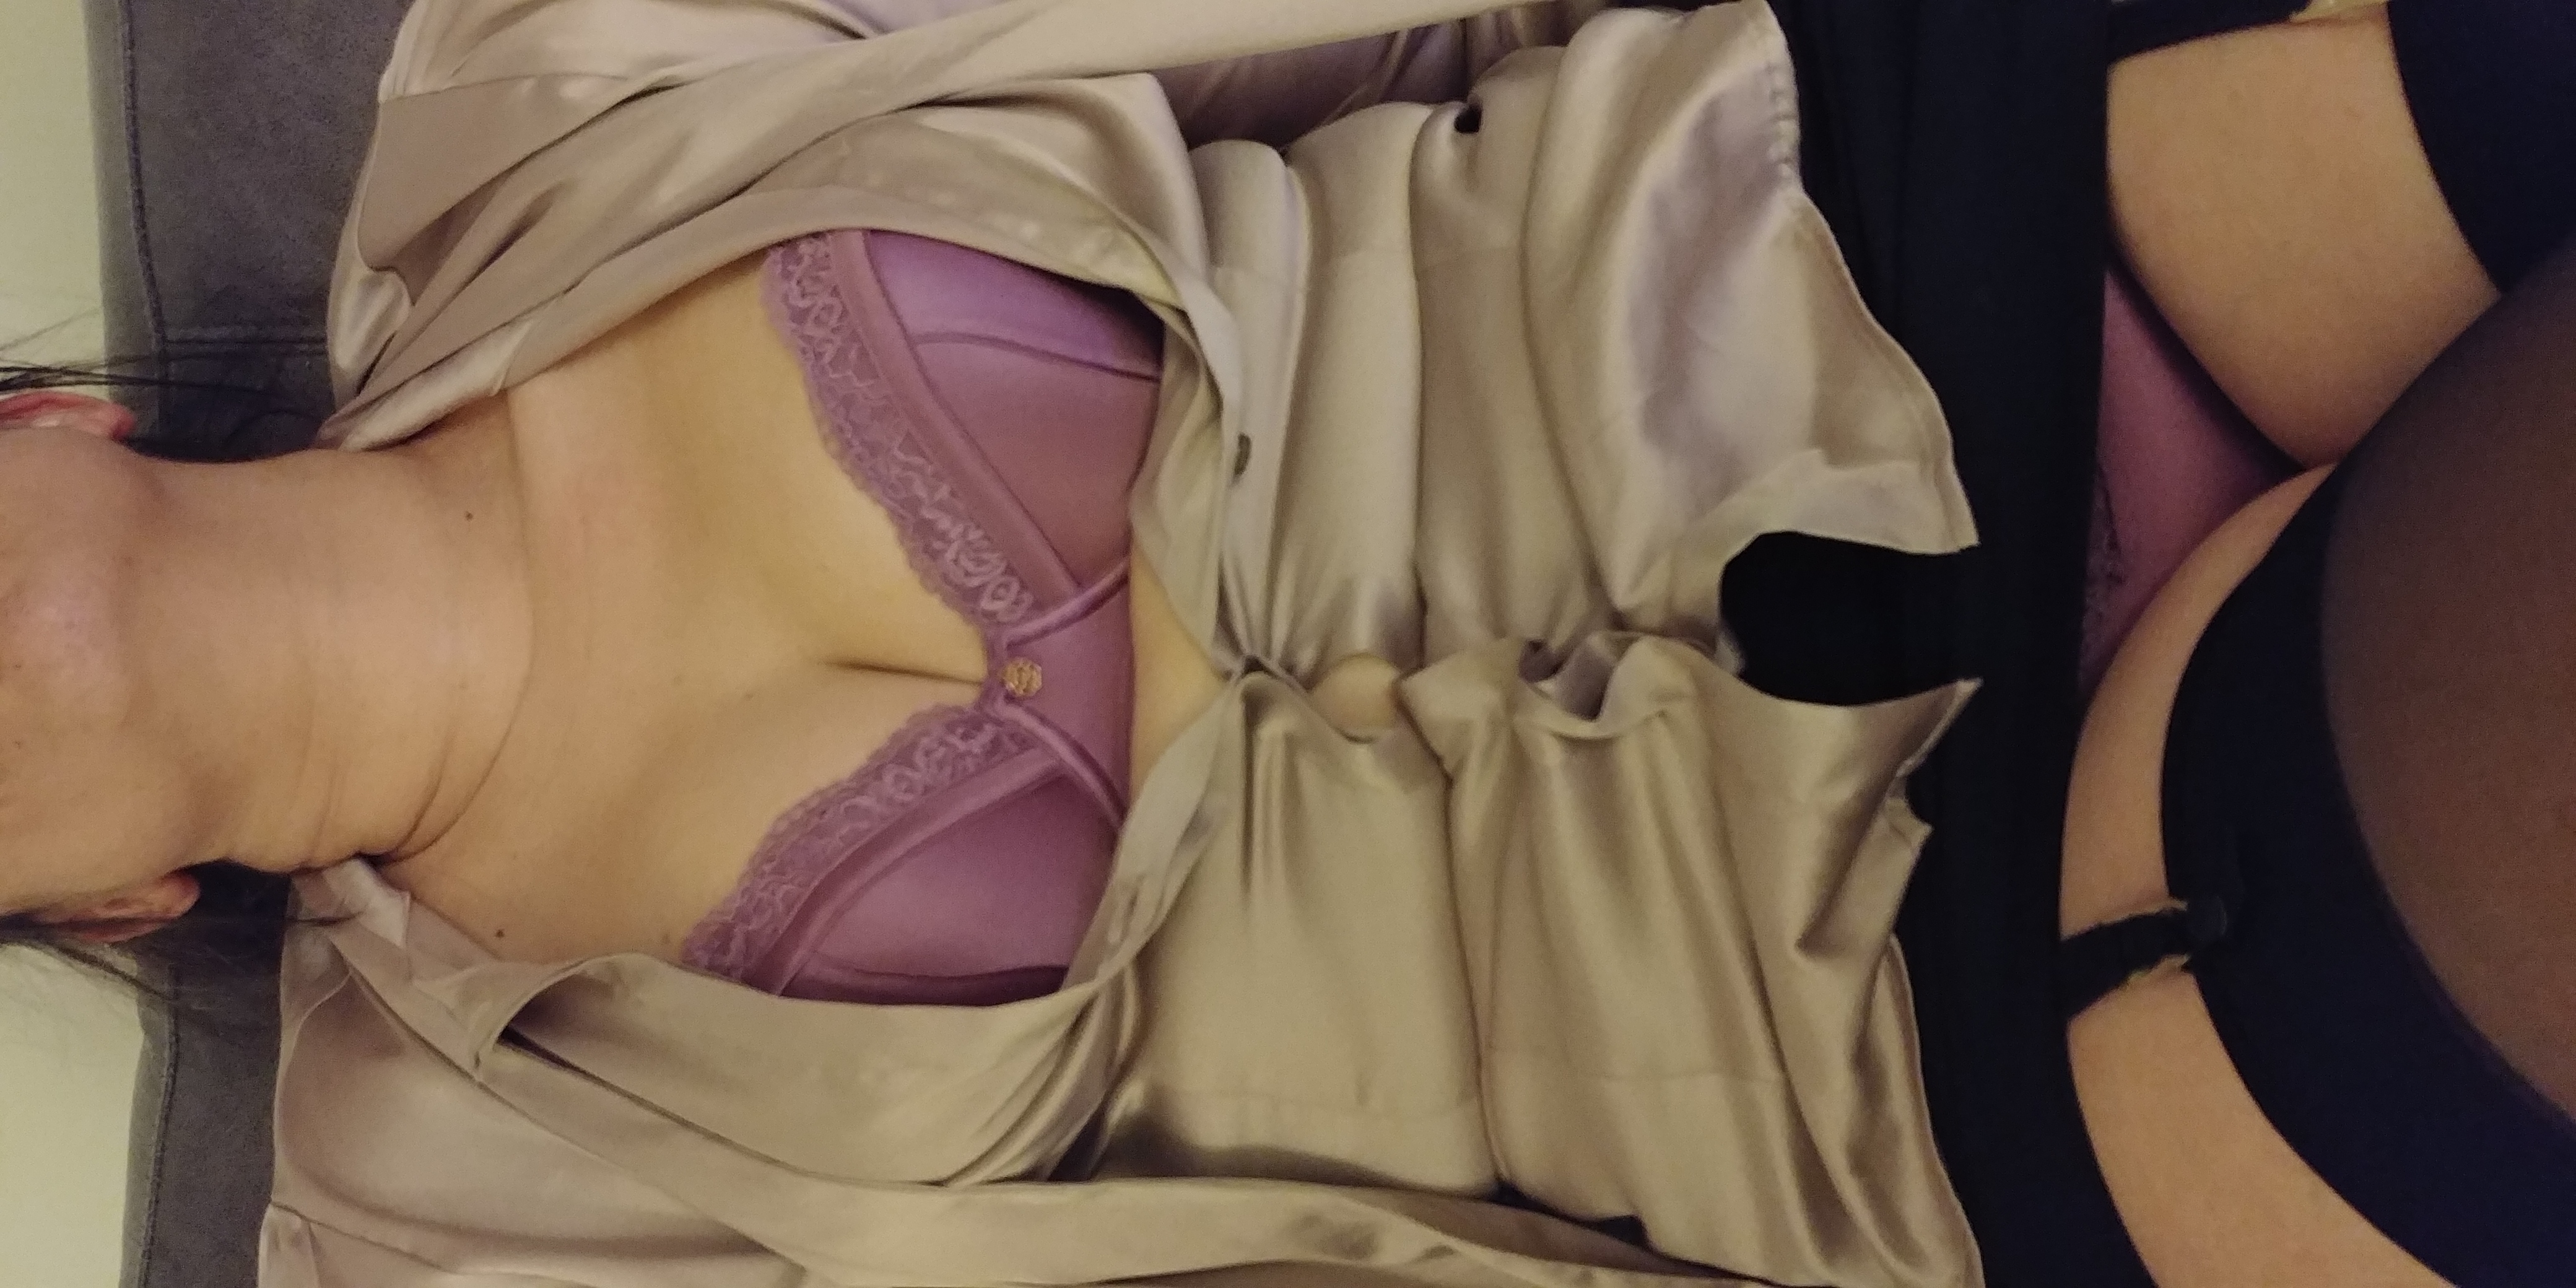 bra and panties On Yuvutu Homemade Amateur Porn Movies And XXX Sex Videos picture image